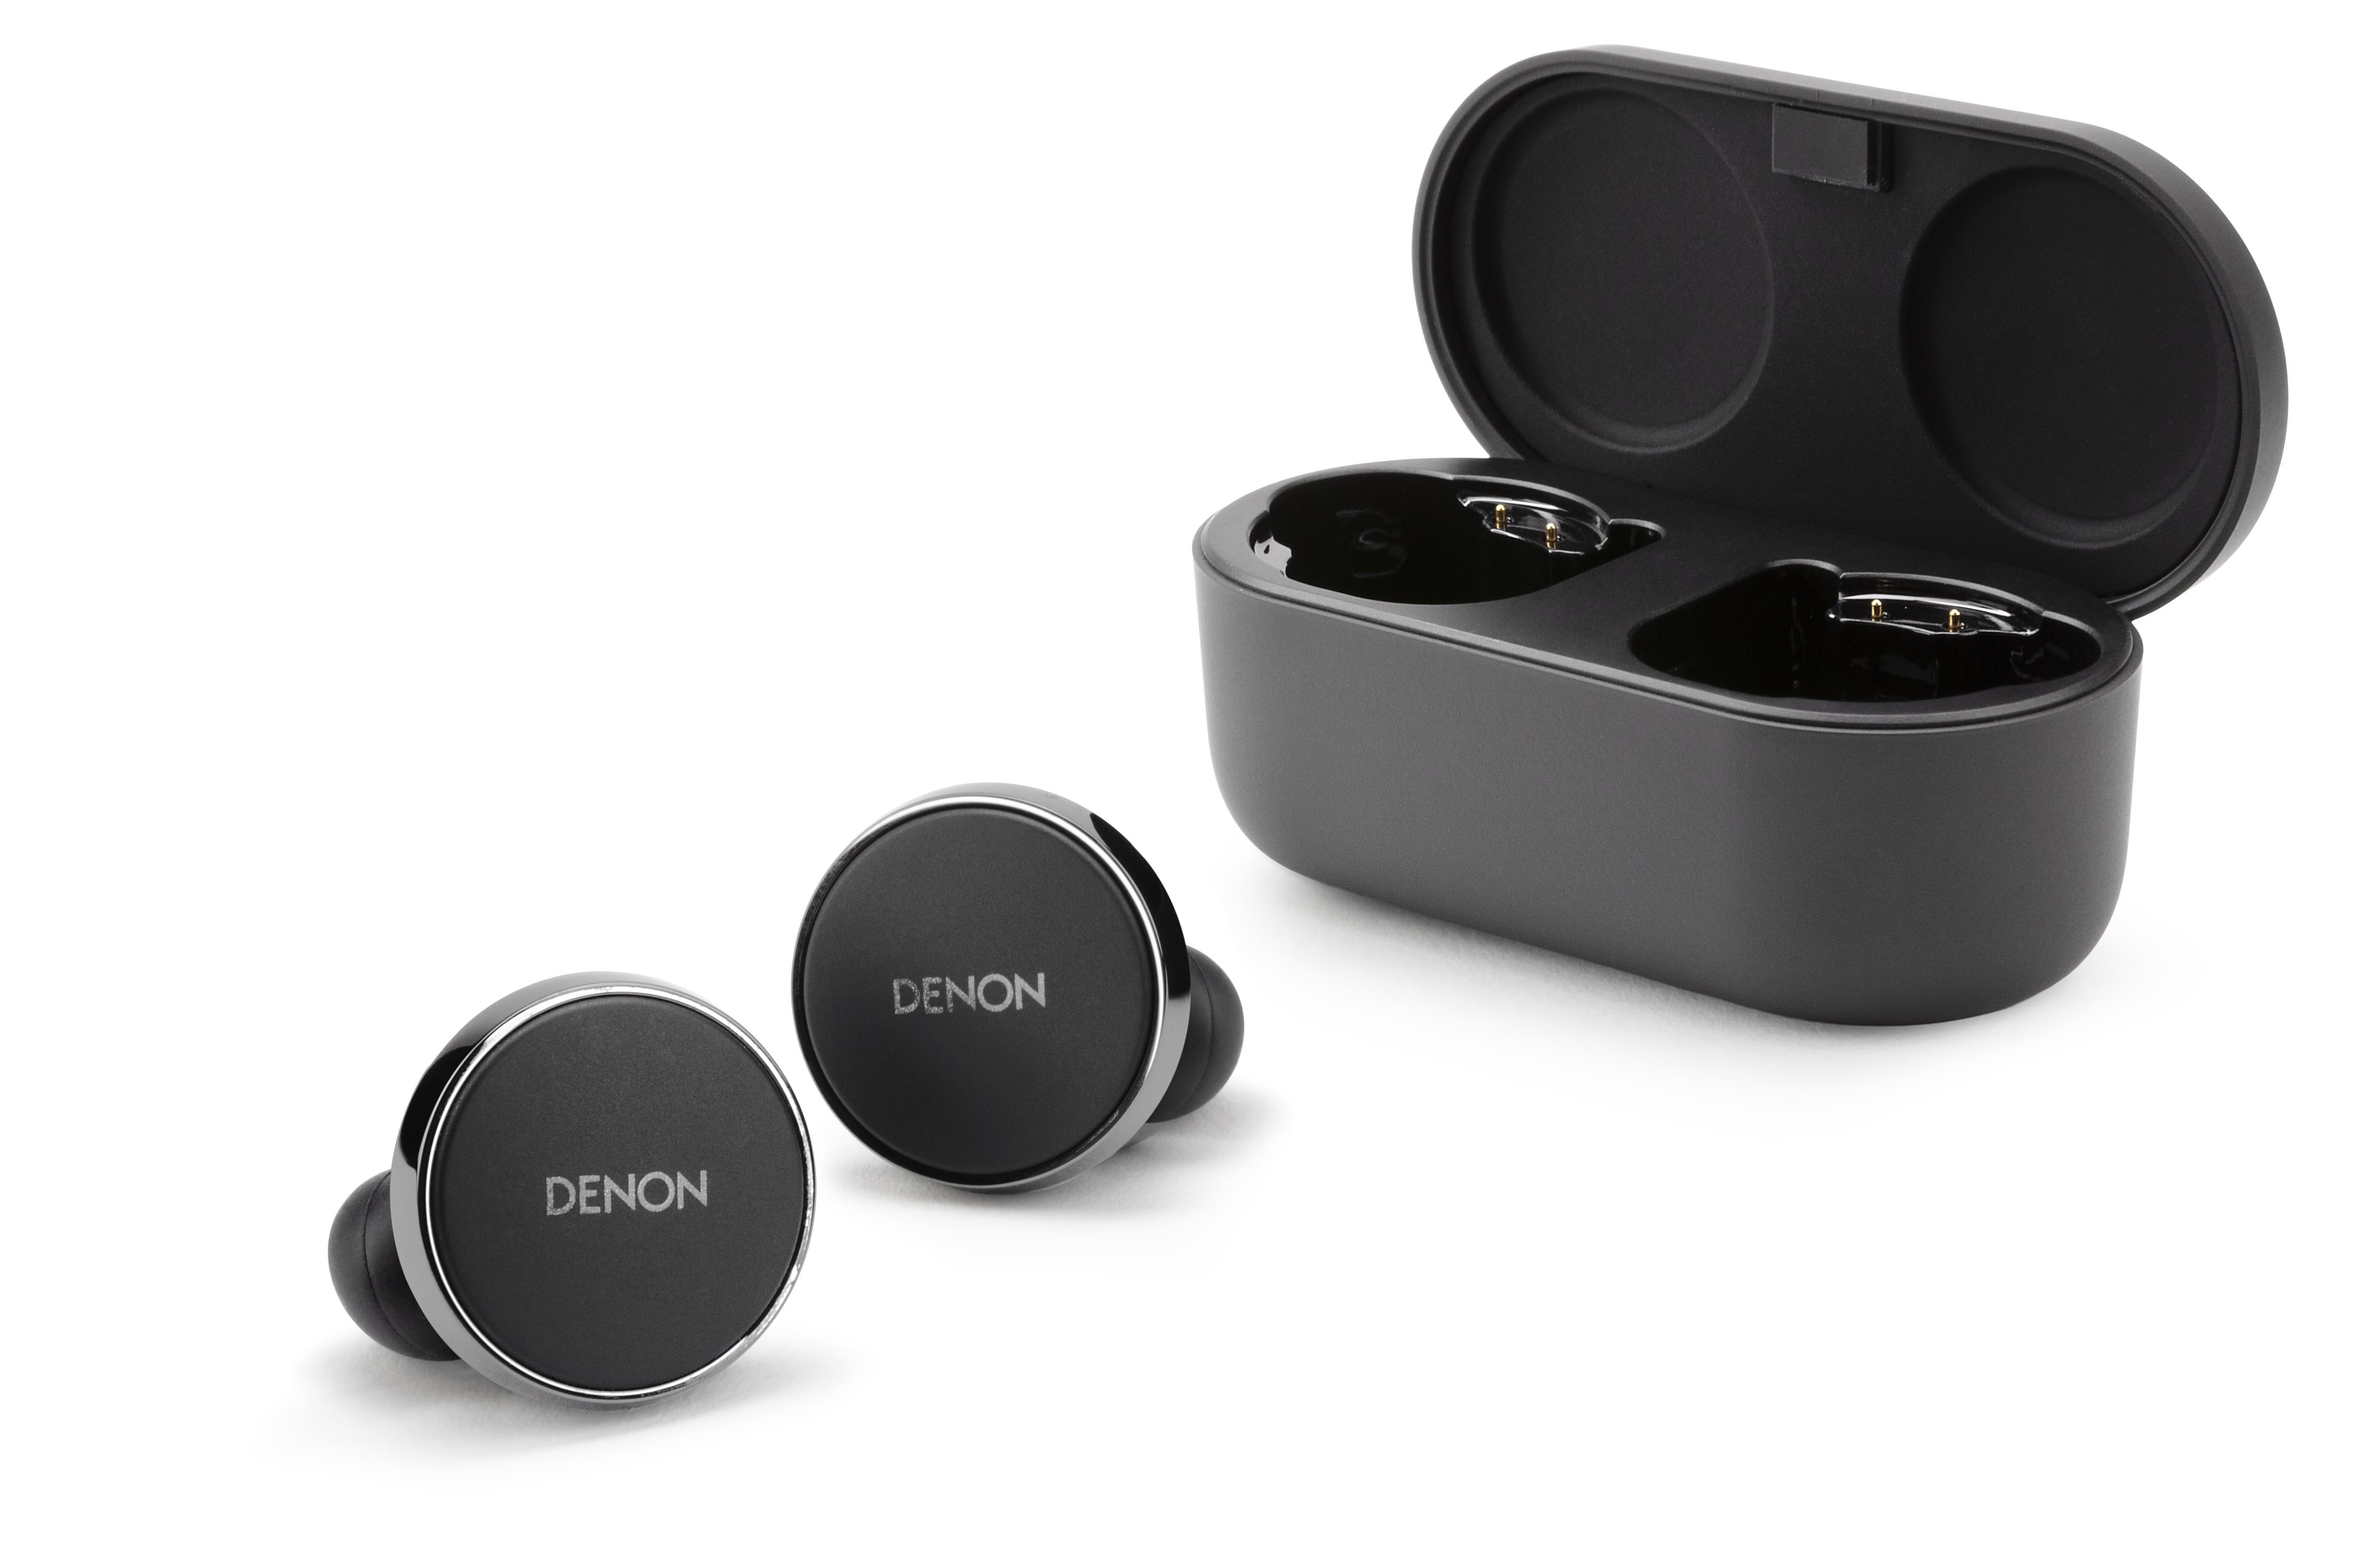 Denon PerL Pro earbuds and case on white background